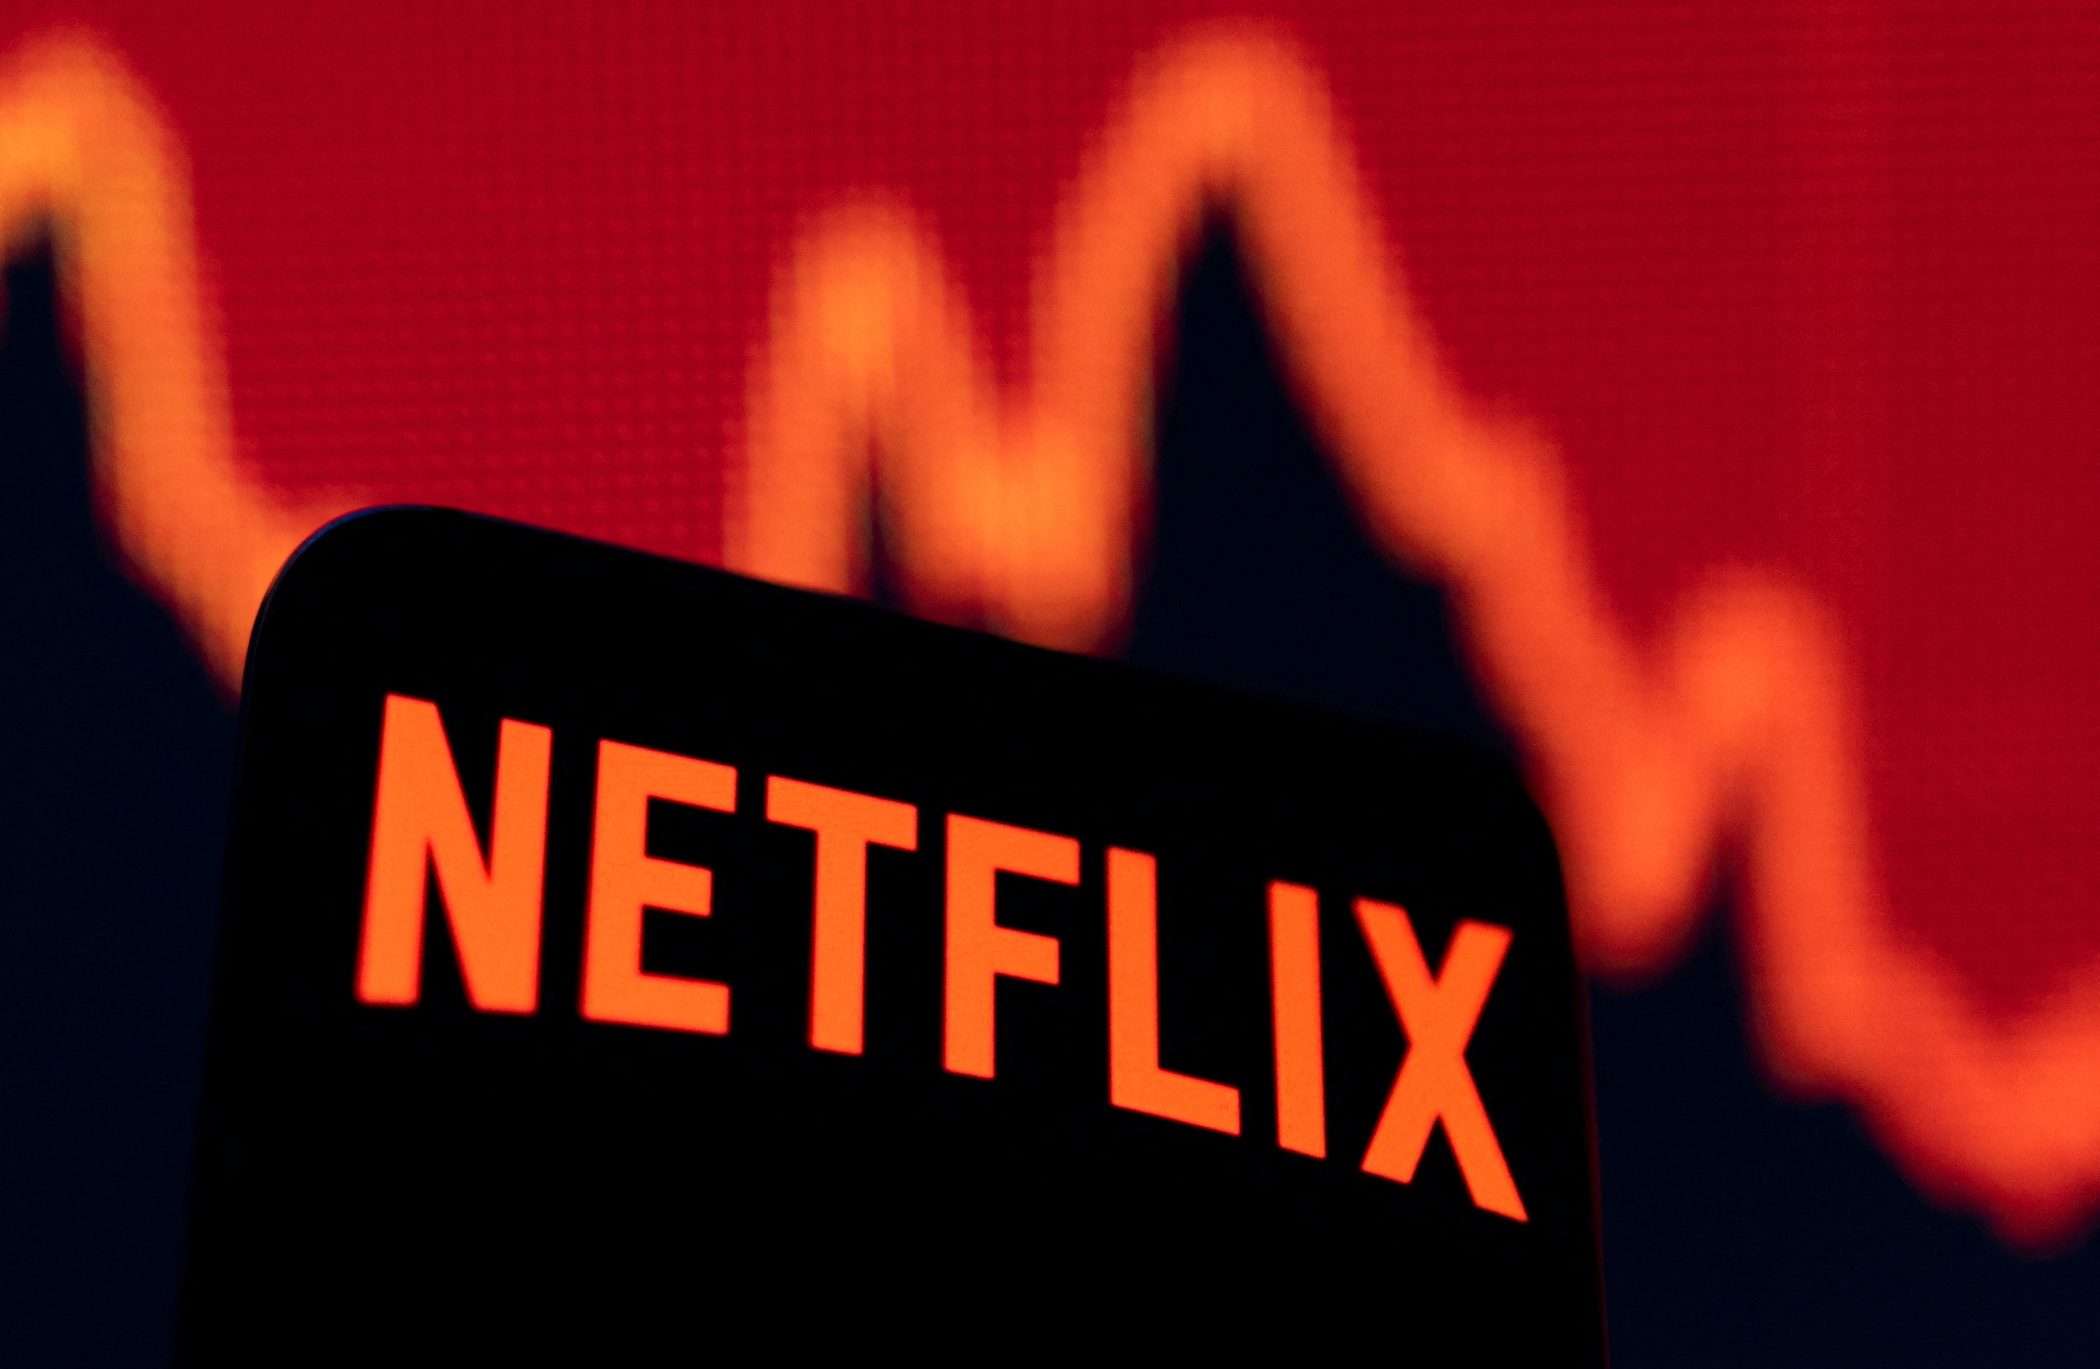 In a market swamped with streaming services, Netflix’s loss of subscribers is a big deal